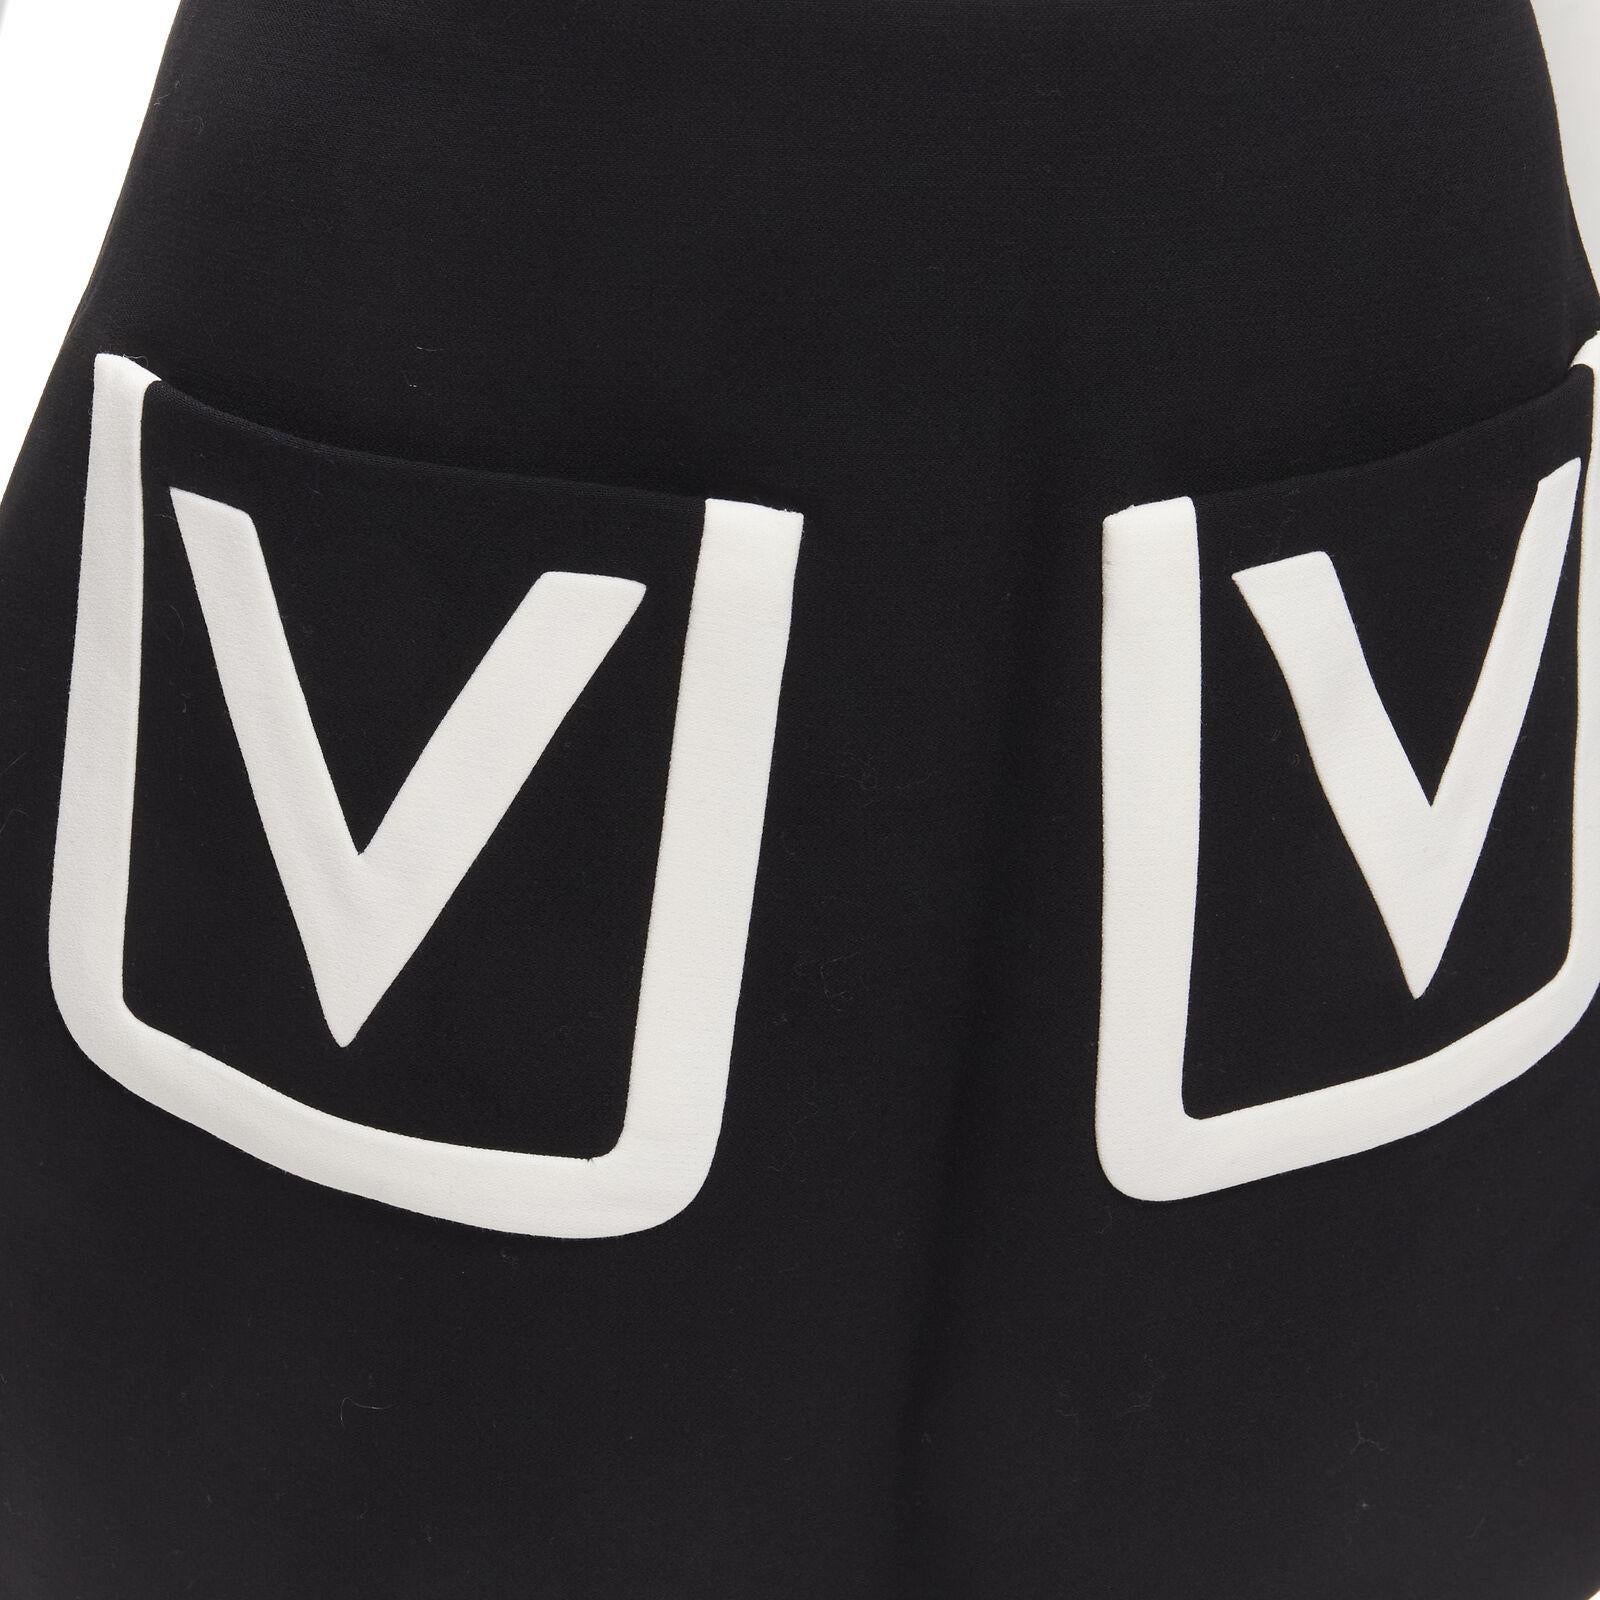 new VALENTINO 100% virgin wool black V Logo patch pocket A-line skirt IT38 XS
Reference: AAWC/A00379
Brand: Valentino
Designer: Pier Paolo Piccioli
Collection: V Logo
Material: Virgin Wool
Color: Black, White
Pattern: Solid
Closure: Zip
Lining: